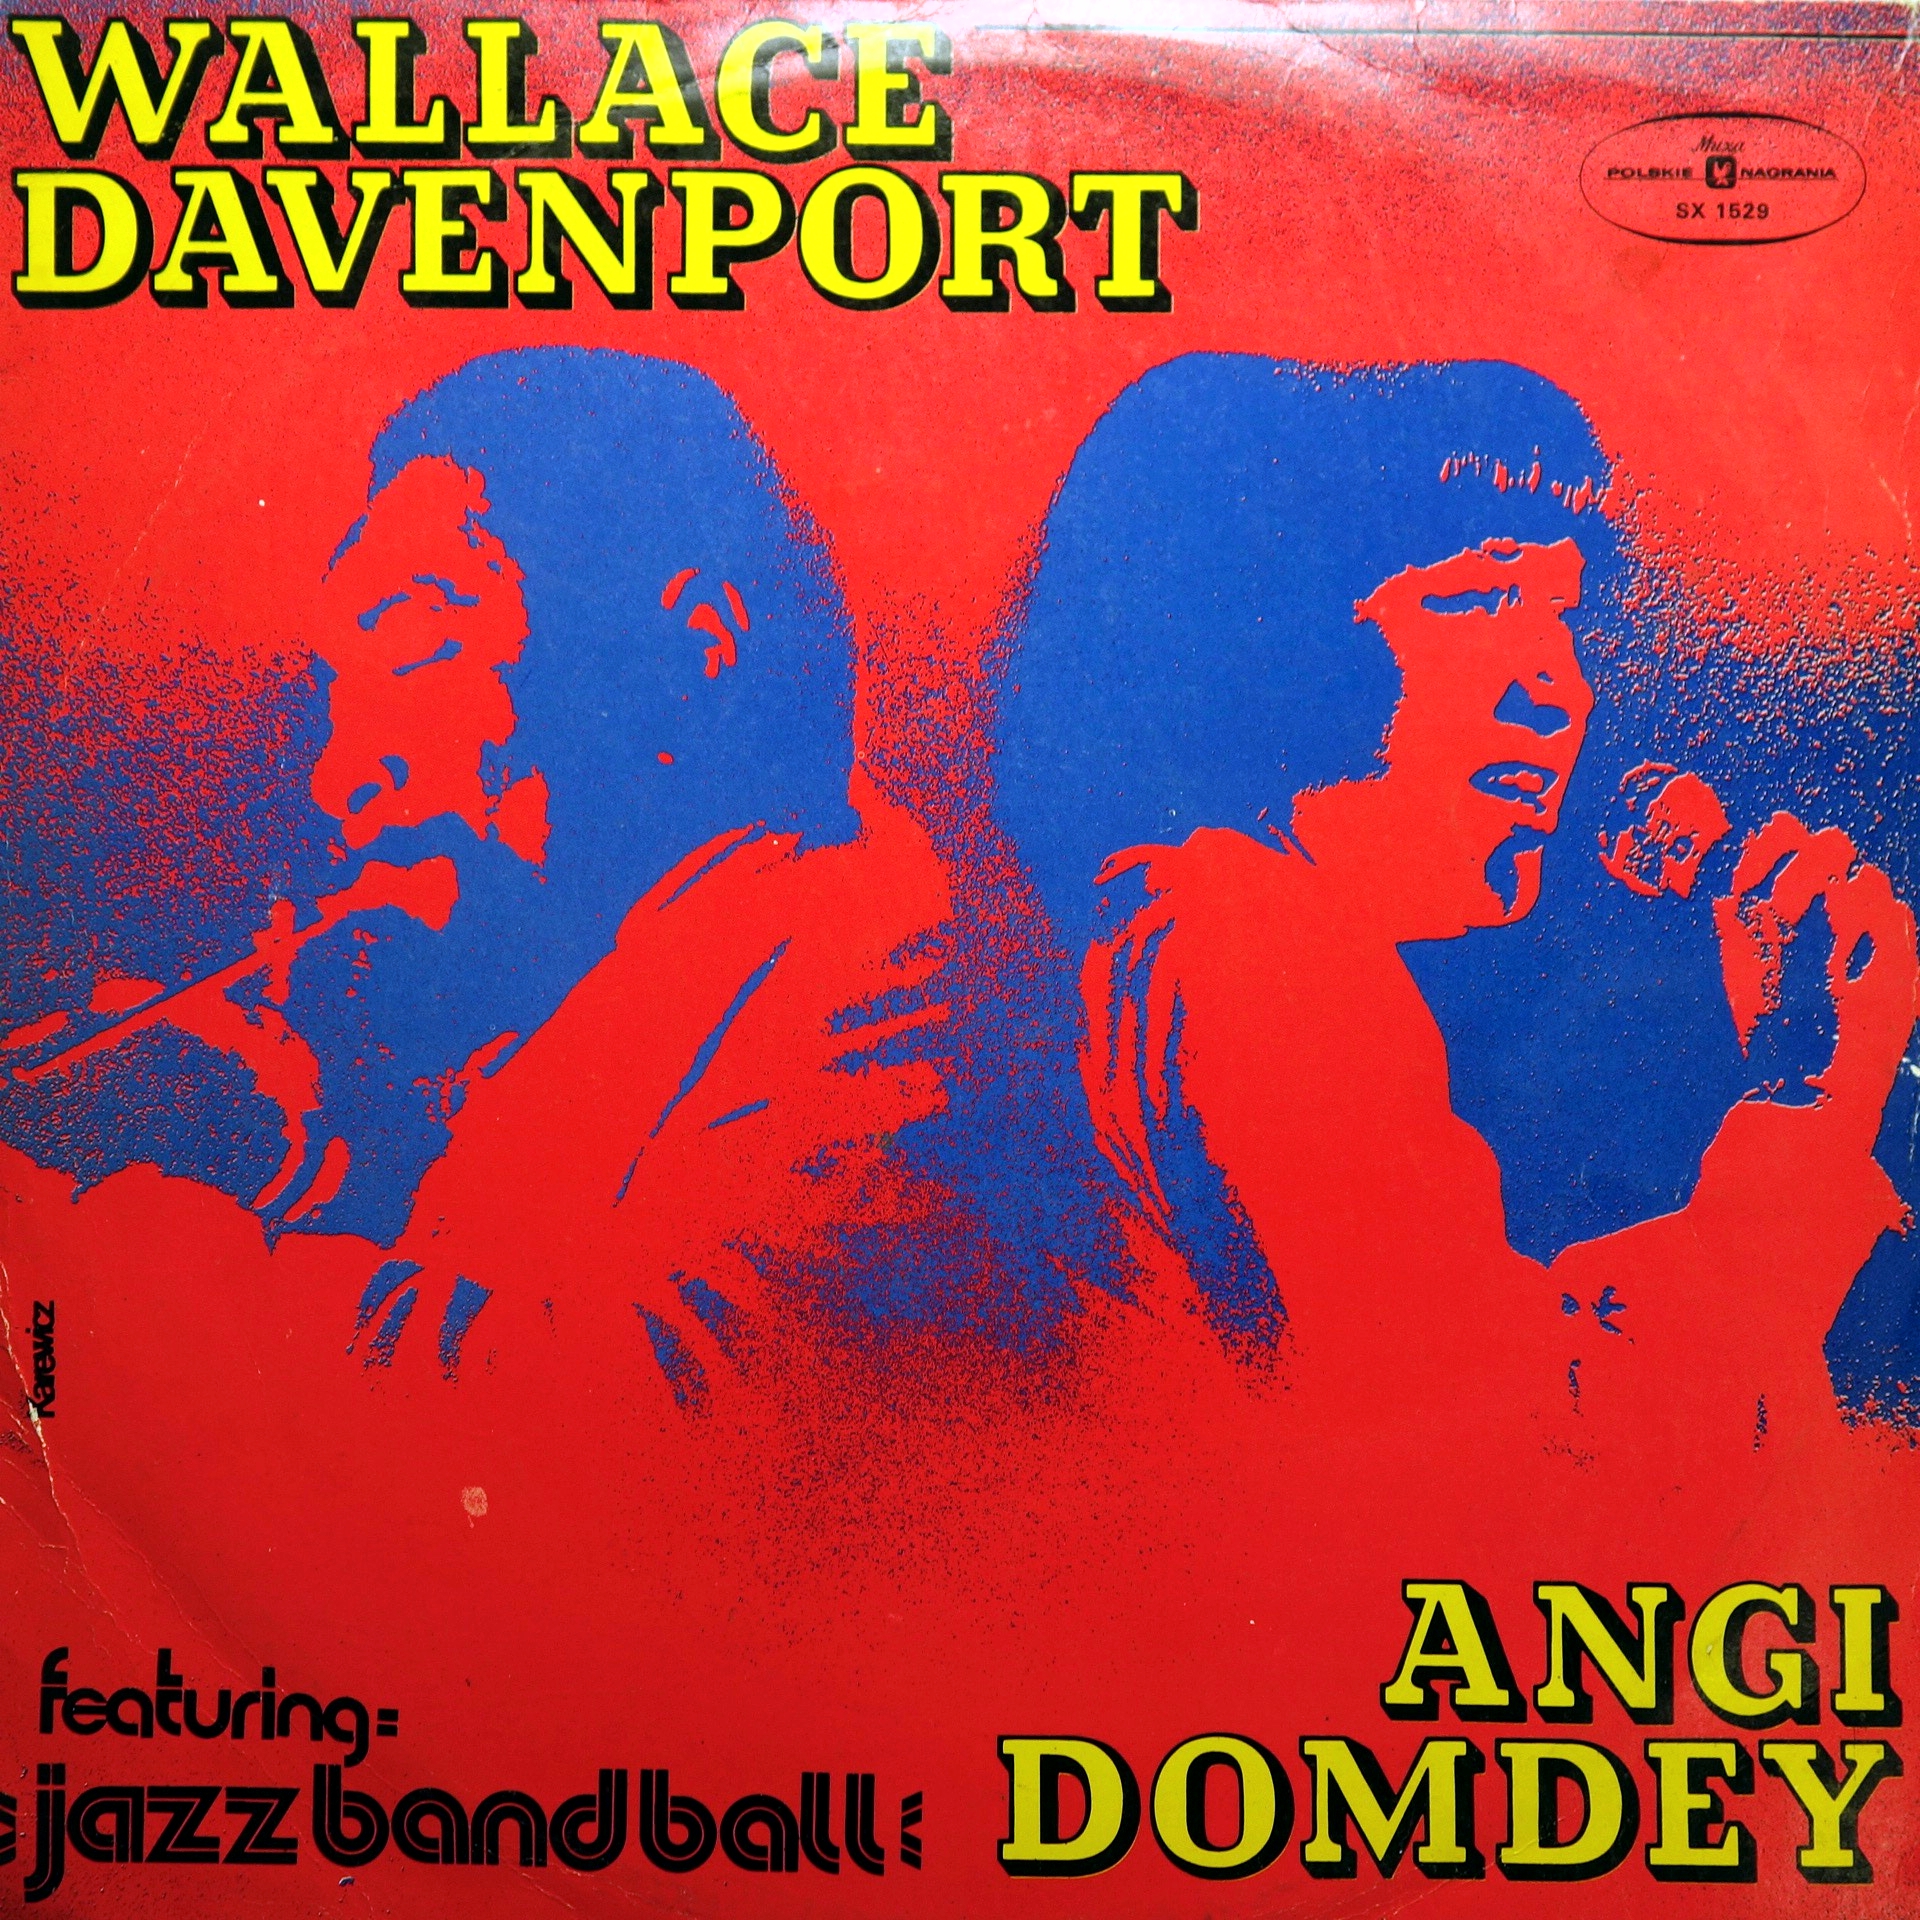 LP Wallace Davenport / Angi Domdey Featuring Jazz Band Ball Orchestra